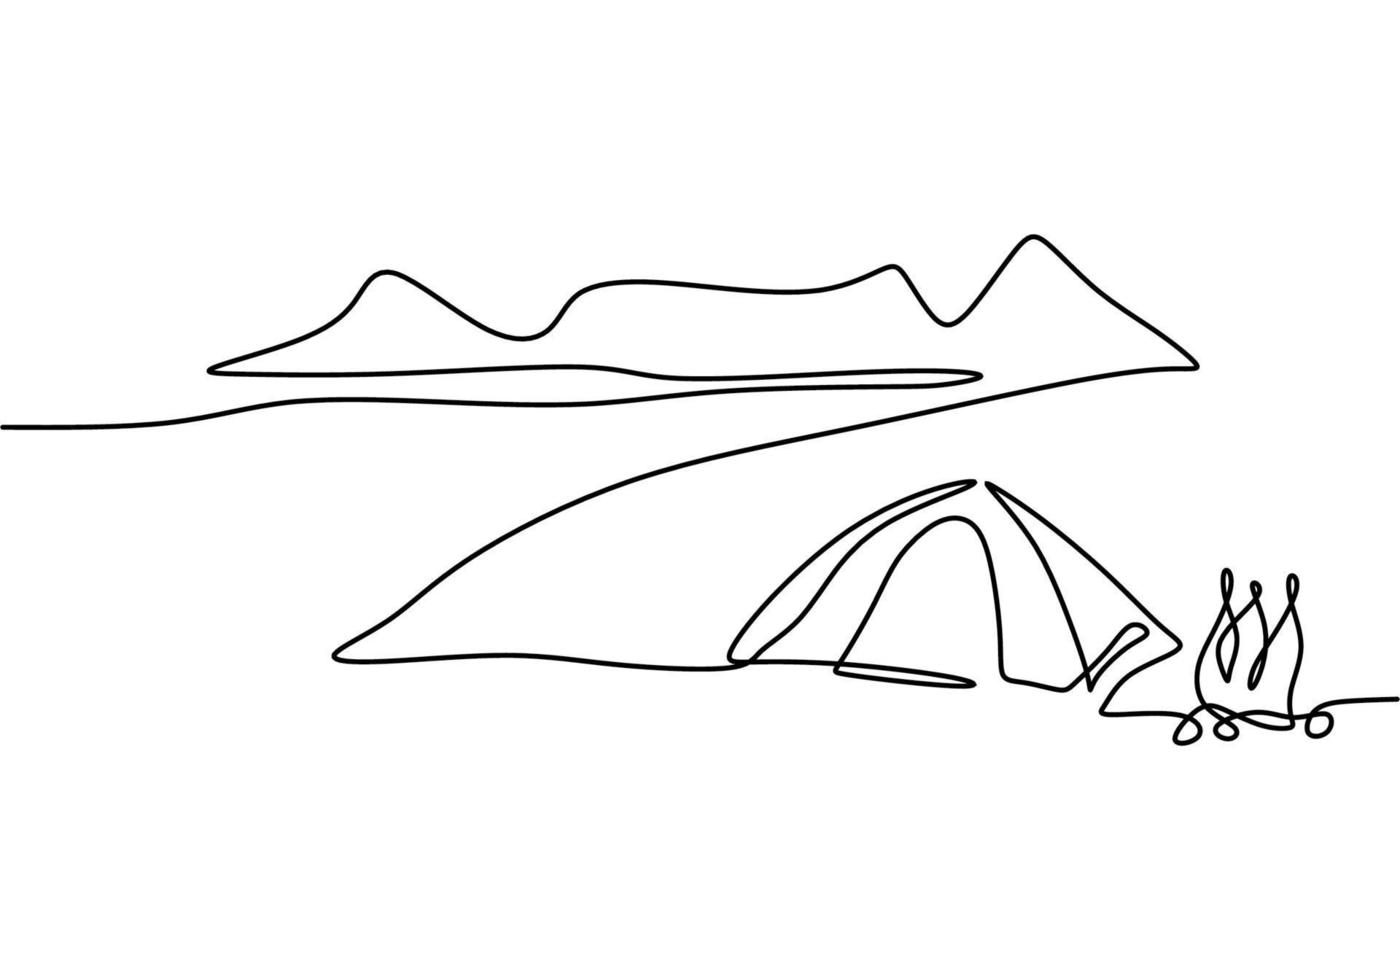 Continuous single line drawing of a lonely tent in mountains with campfire isolated on white background. Car caravan, travel trailer, camper,camper trailer concept. Minimalist style. Vector